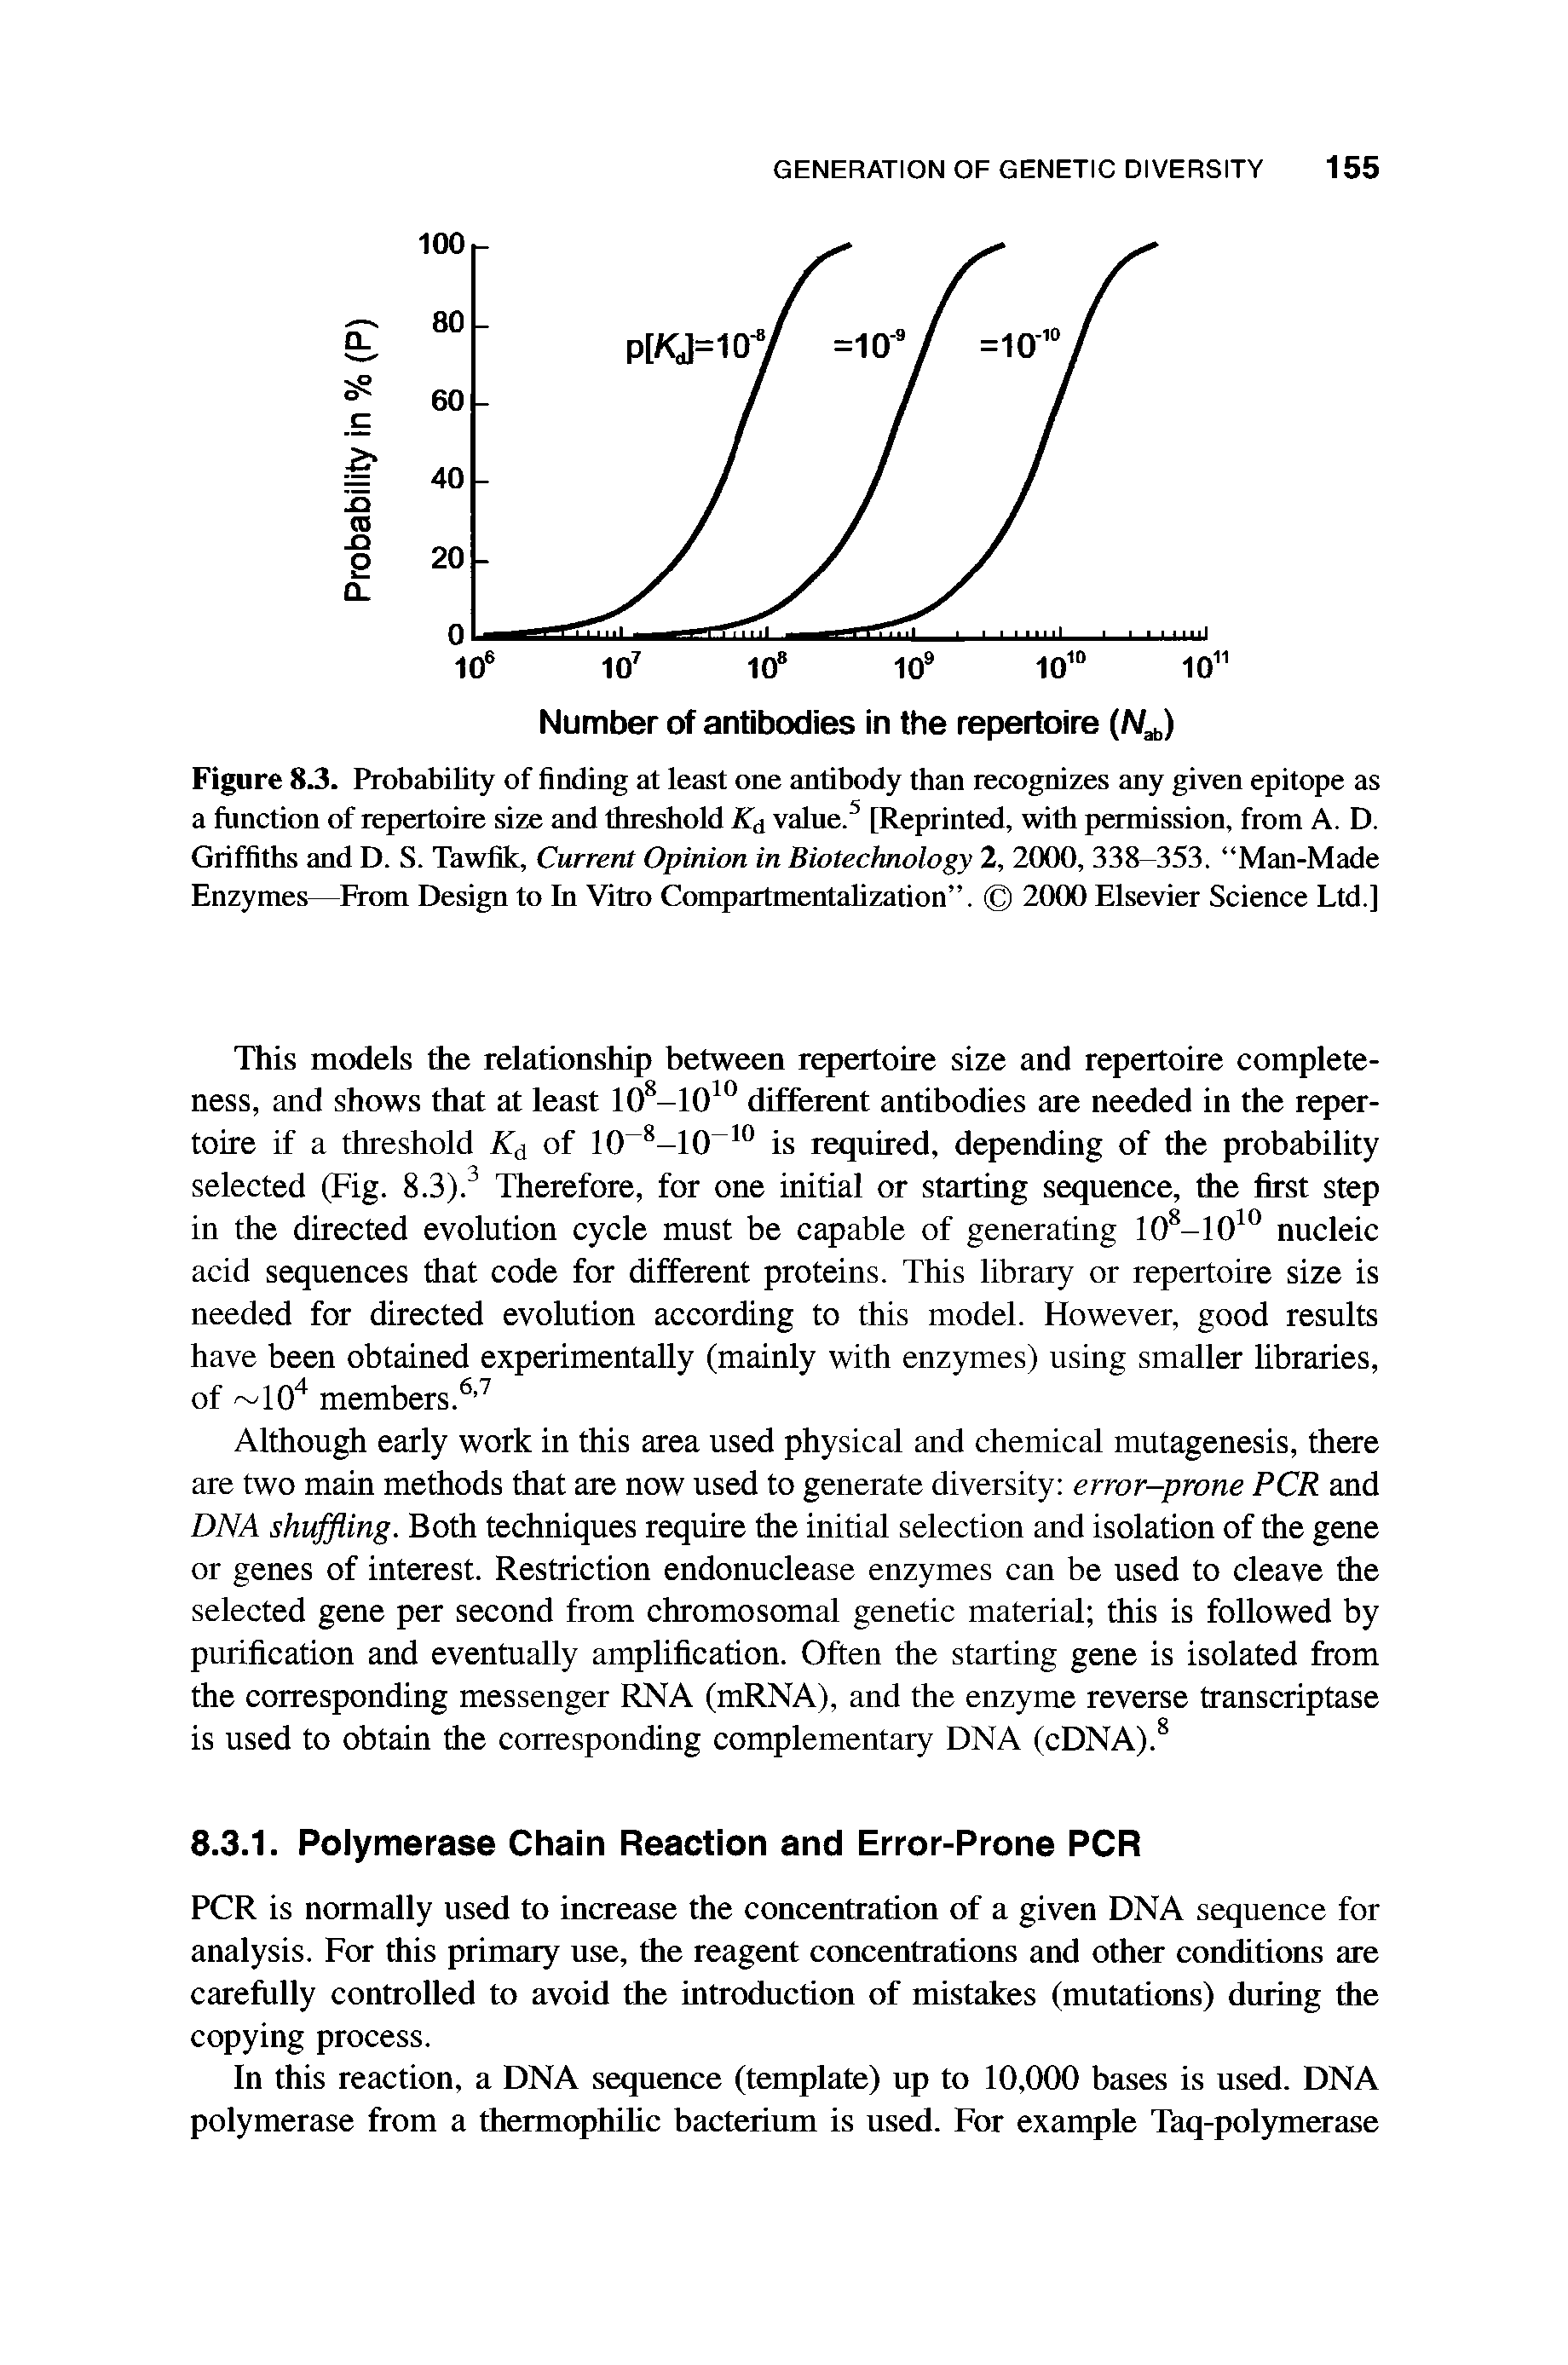 Figure 8.3. Probability of finding at least one antibody than recognizes any given epitope as a function of repertoire size and threshold Kd value.5 [Reprinted, with permission, from A. D. Griffiths and D. S. Tawfik, Current Opinion in Biotechnology 2, 2000, 338-353. Man-Made Enzymes—From Design to In Vitro Compartmentalization . 2000 Elsevier Science Ltd.]...